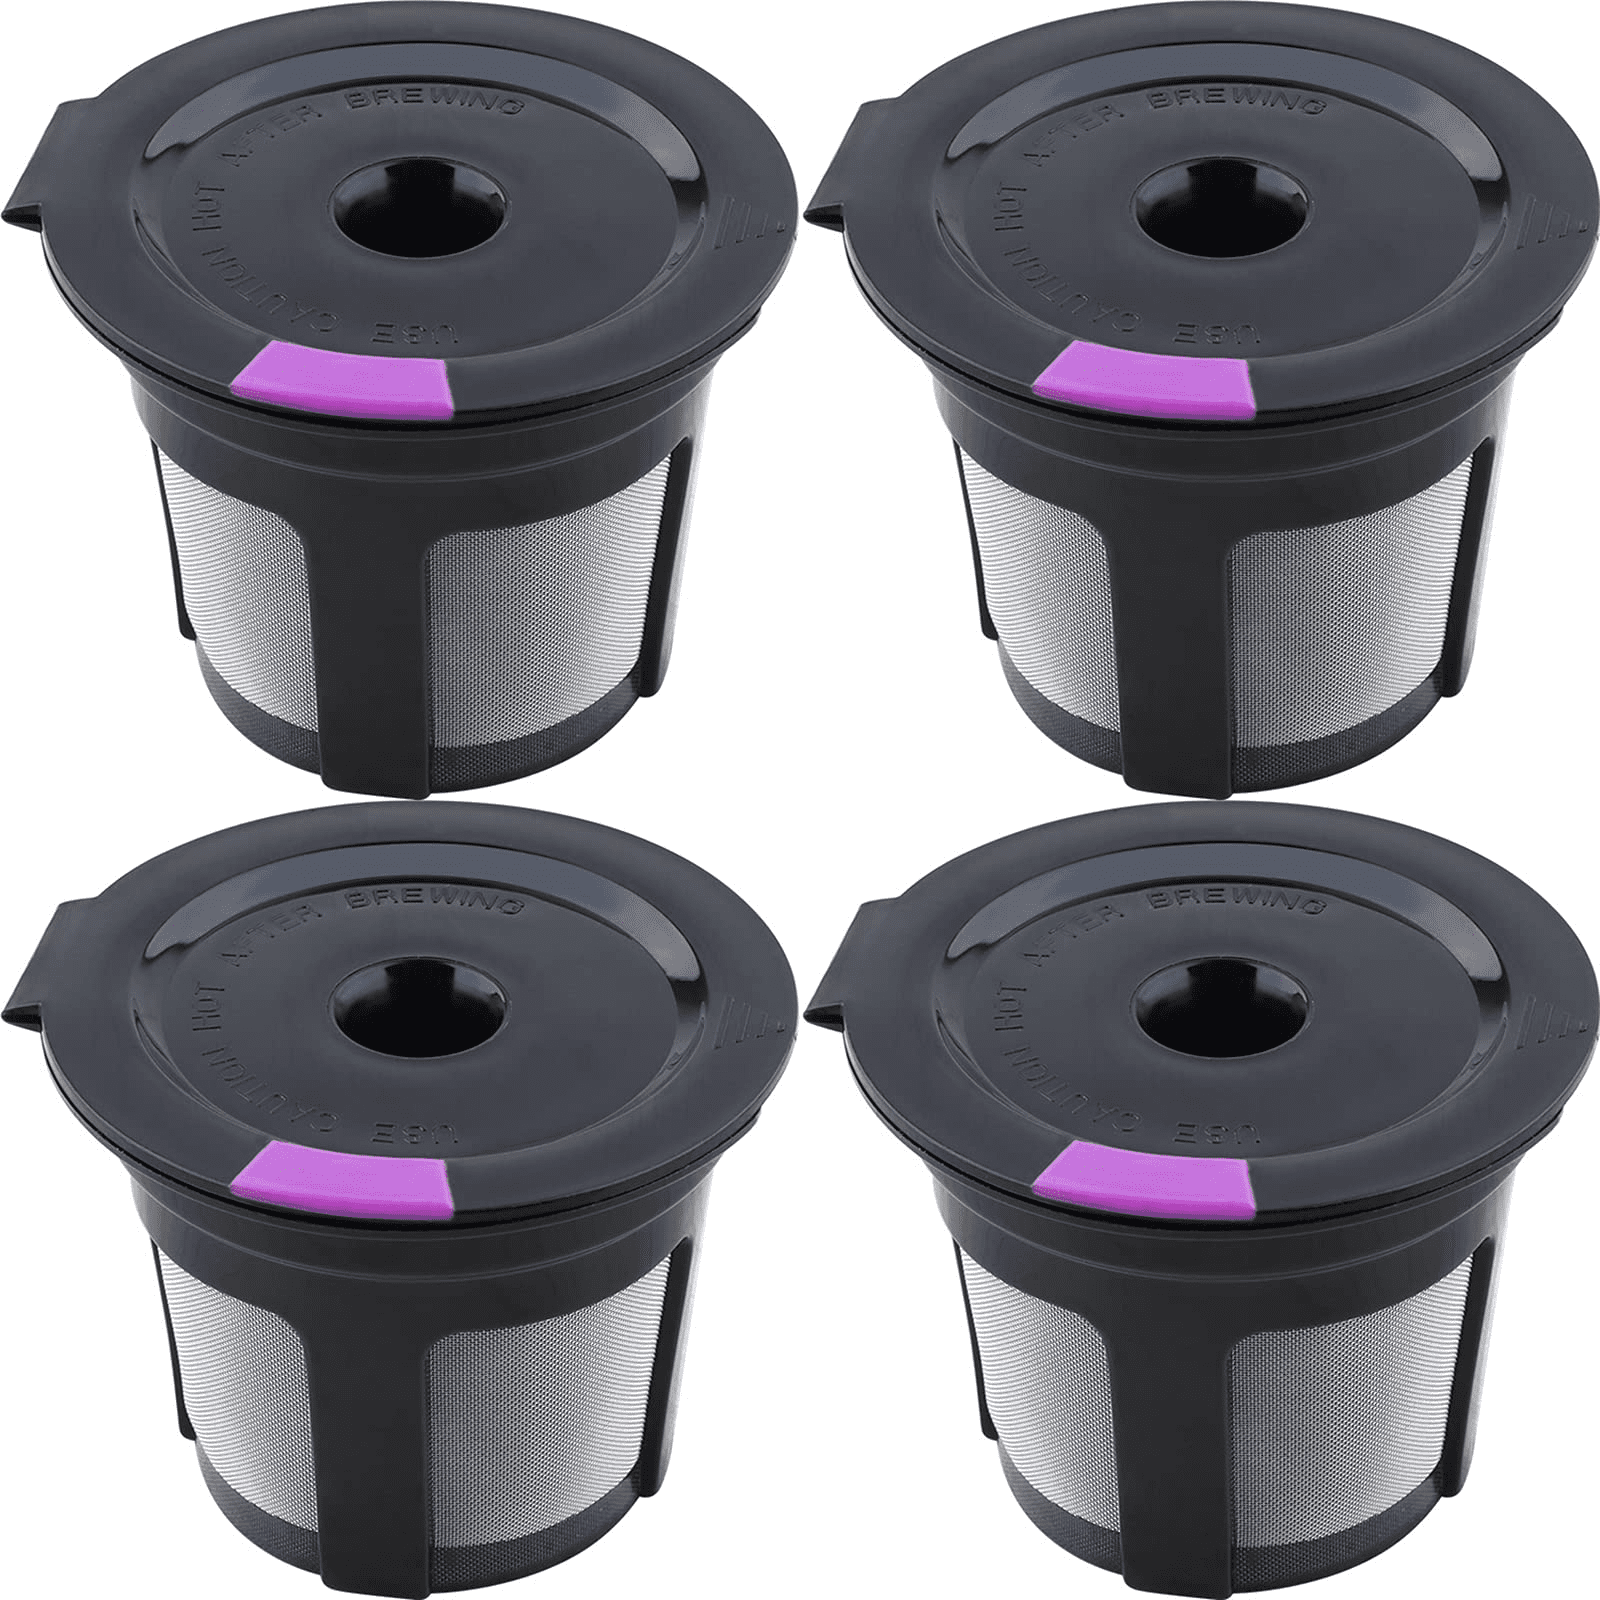 4 Reusable K Cups for Keurig 2.0 & 1.0 Coffee Makers Universal Refillable kcup, 